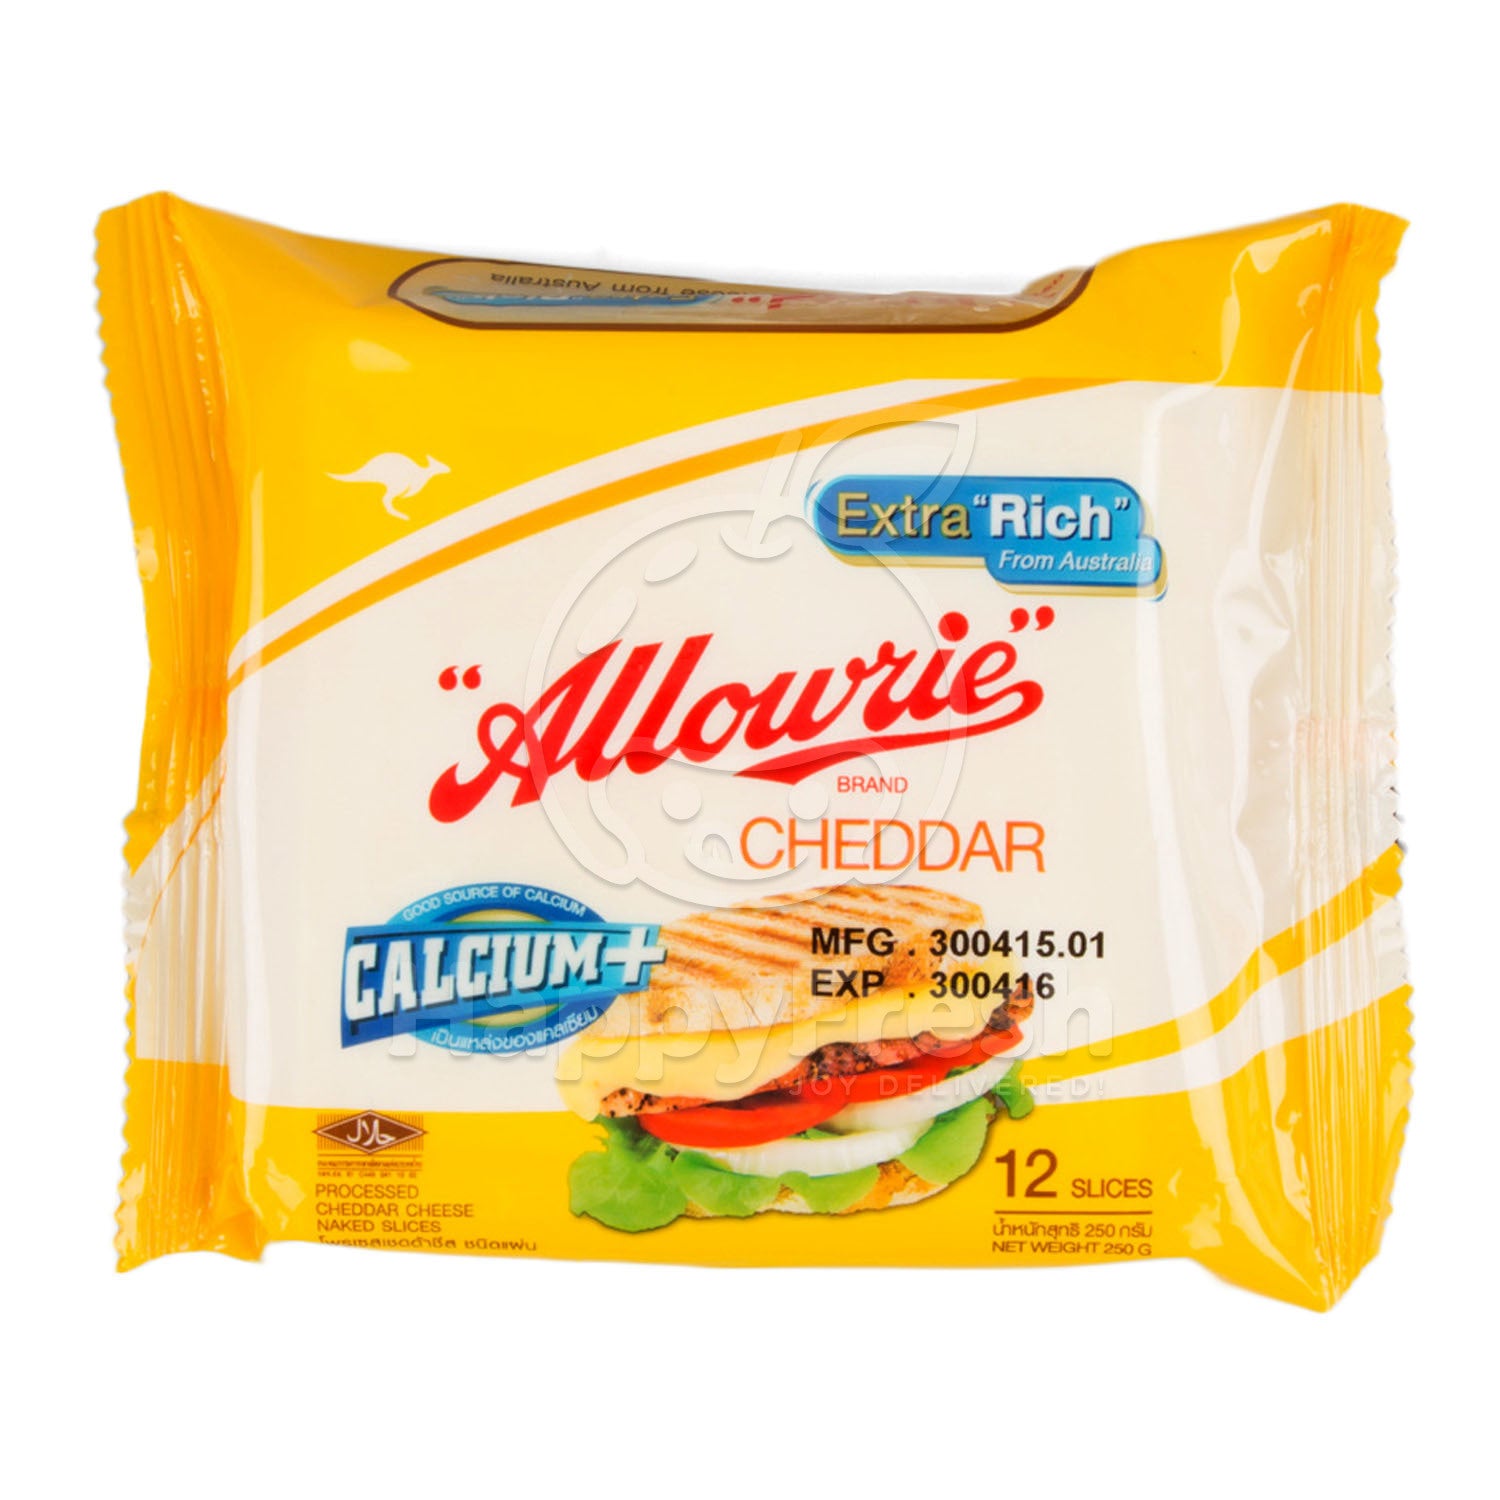 tha>Allowie Cheddar Cheese, processed, 24 slices